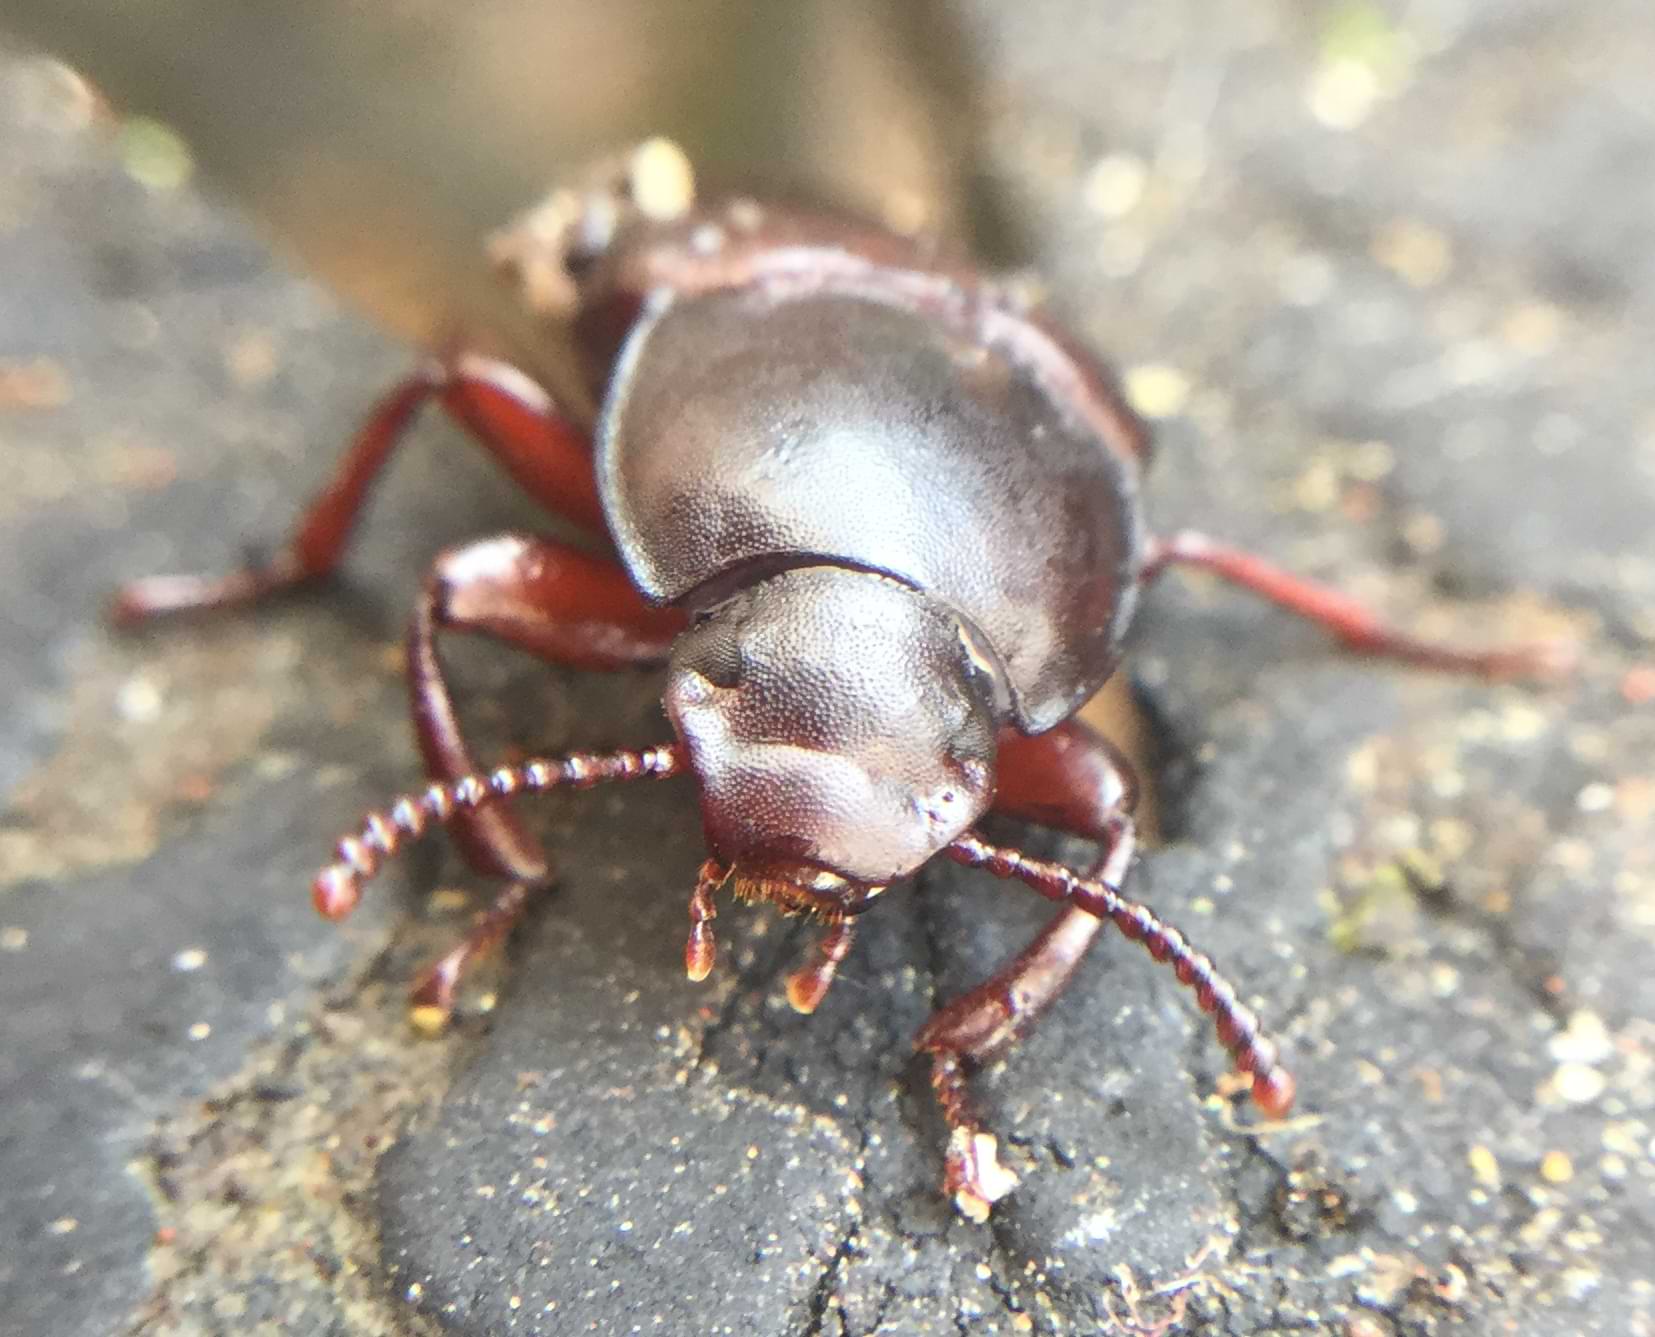 Macro photo of a beetle looking towards the camera.